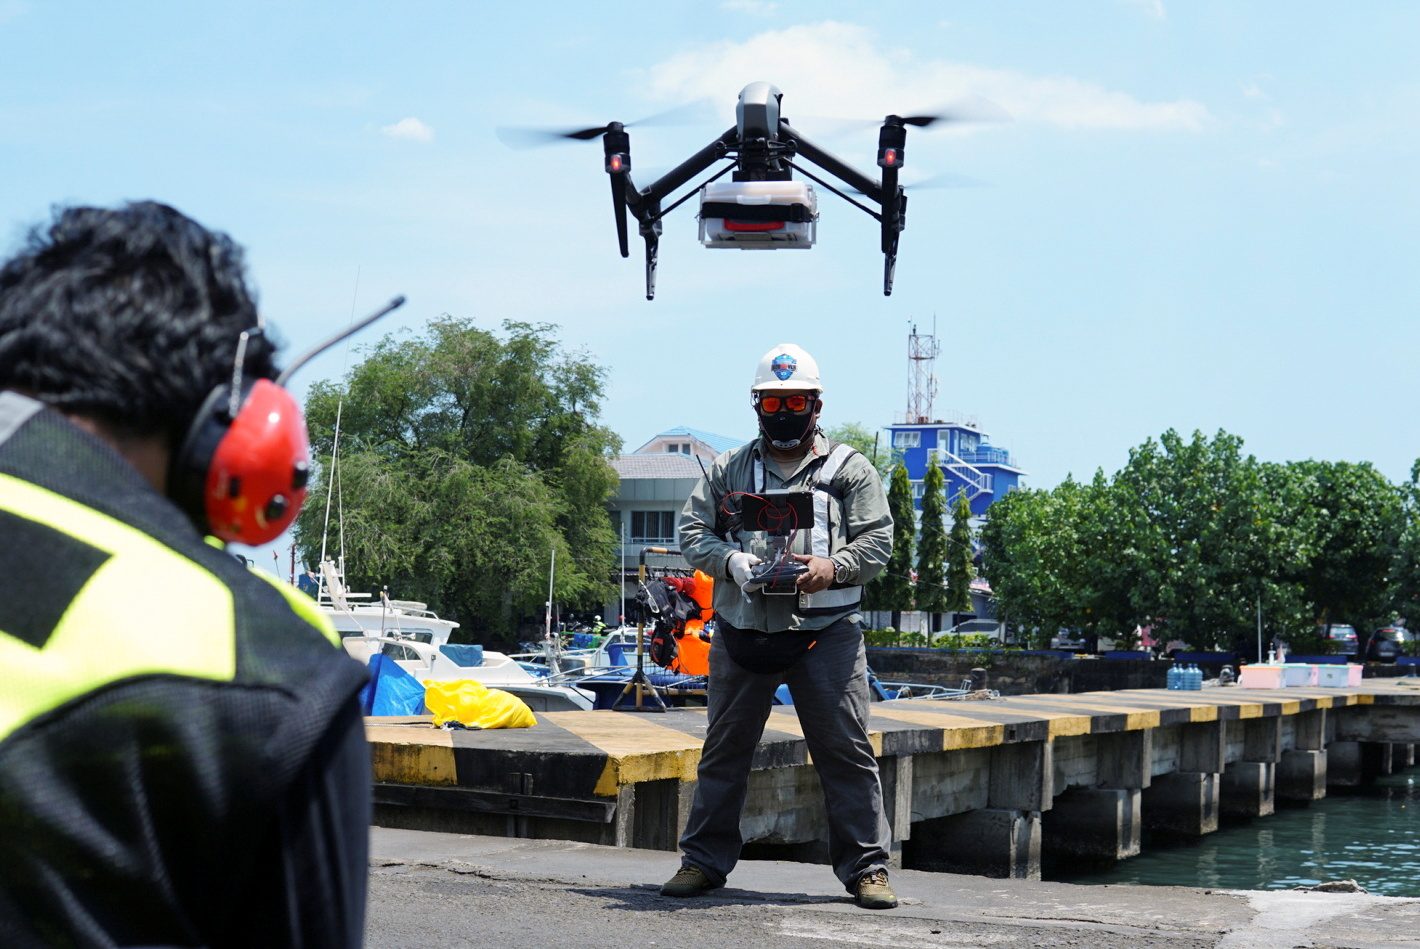 In Indonesia, drone deliveries provide lifeline for isolating COVID-19 patients